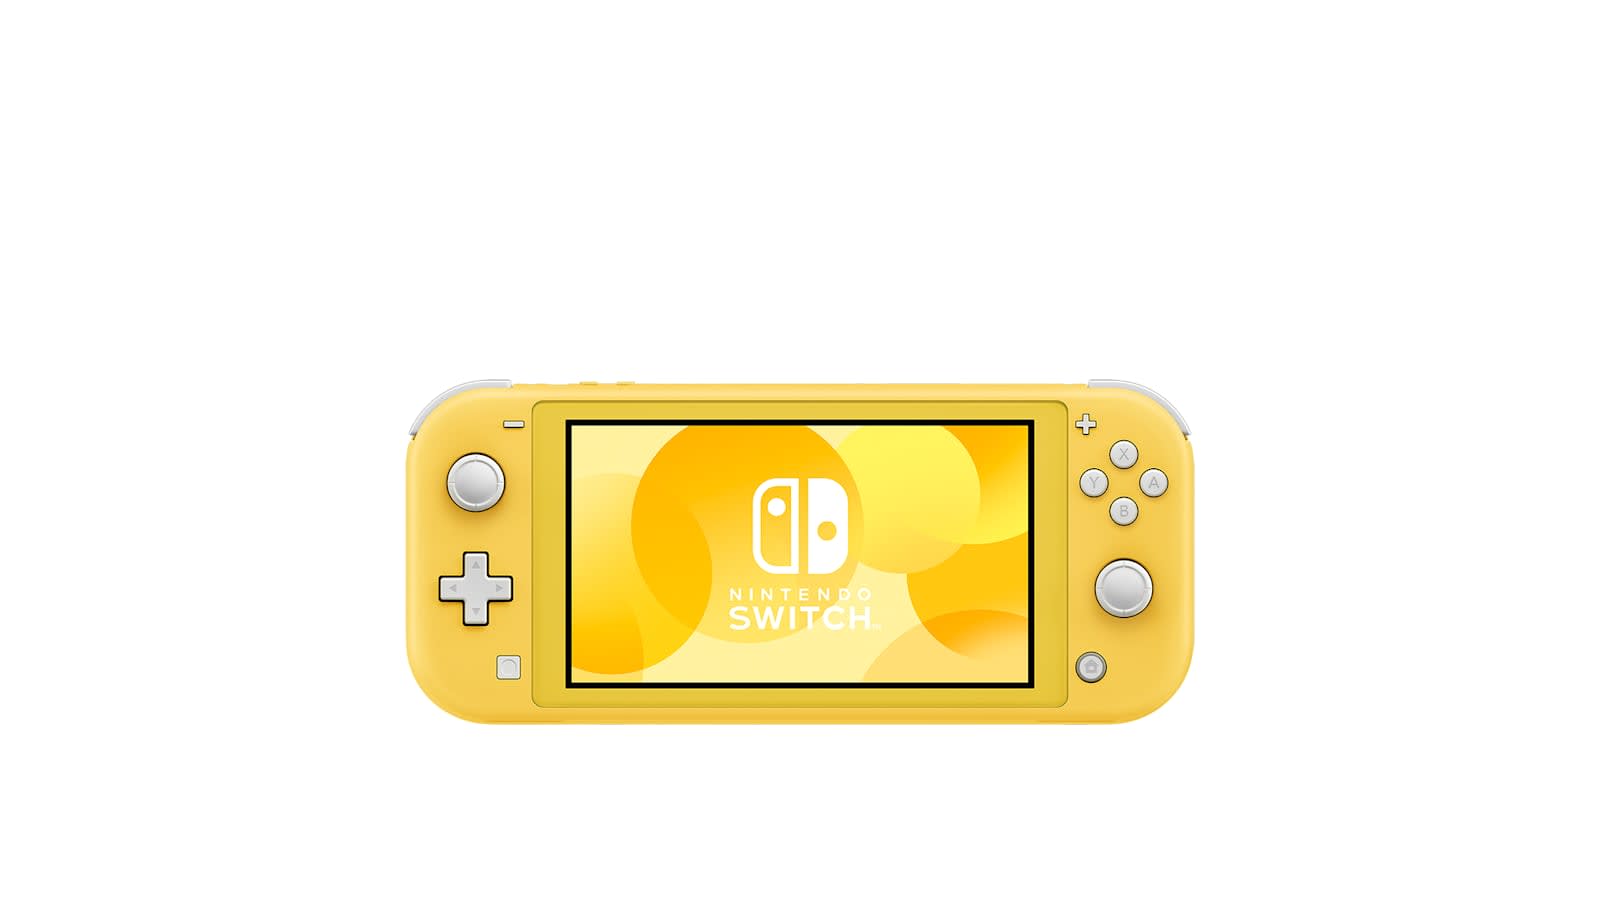 Another Code: Recollection Nintendo Switch, Nintendo Switch Lite, Nintendo  Switch – OLED Model [Digital] - Best Buy